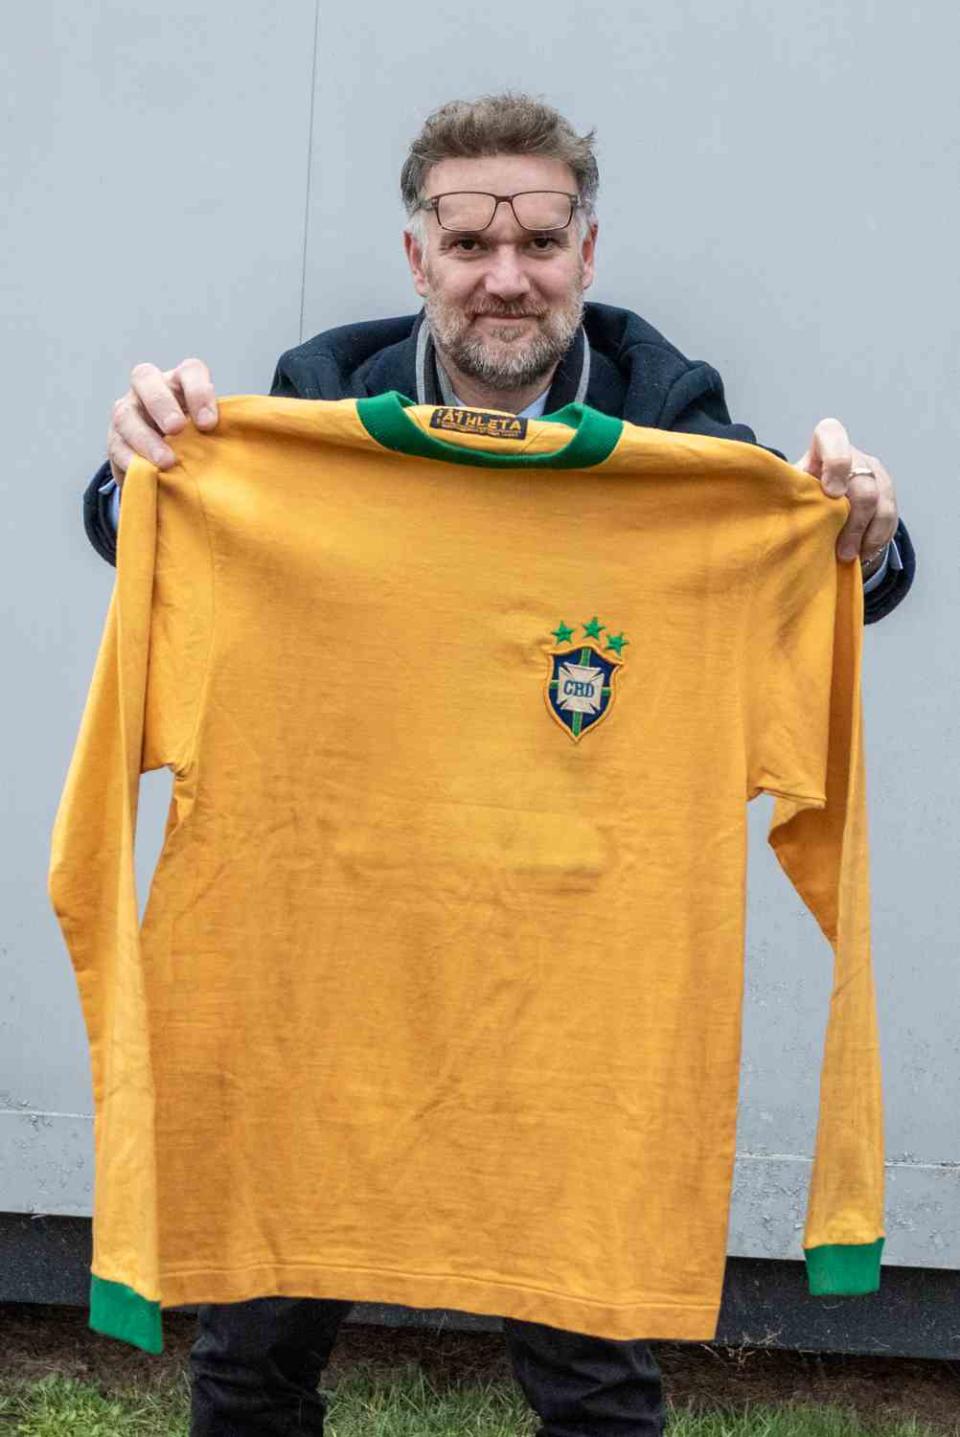 Charles Hanson, owner of Hansons Auctioneers, with the Pele shirt (Mark Laban Hansons/PA)